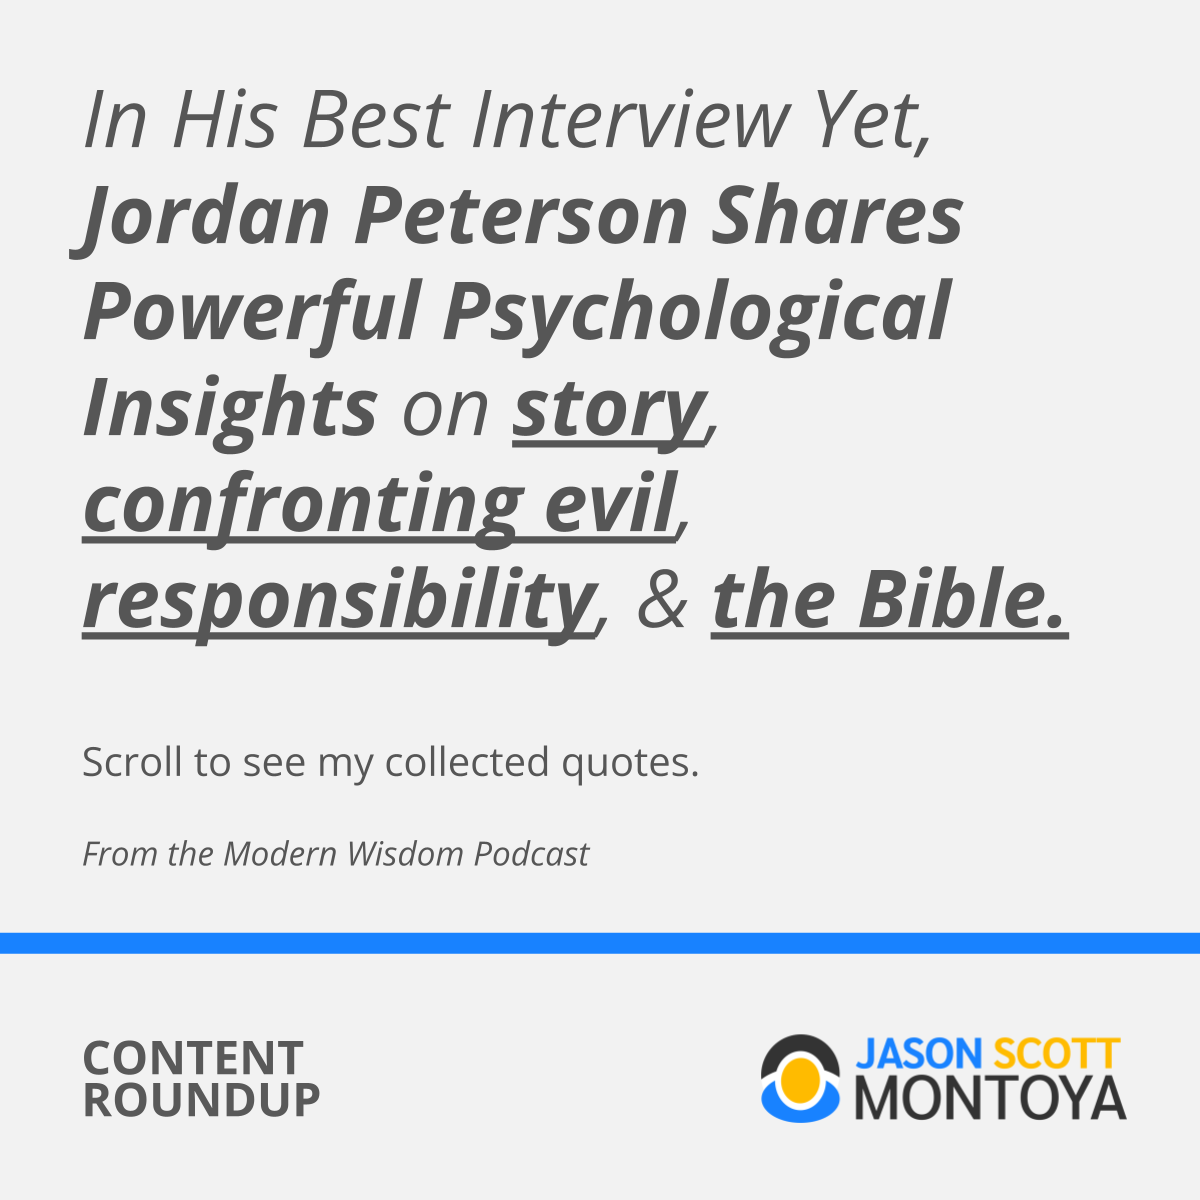  In His Best Interview Yet, Jordan Peterson Shares Powerful Psychological Insights on story, confronting evil, responsibility, & the Bible.  Scroll to see my collected quotes.  From the Modern Wisdom Podcast